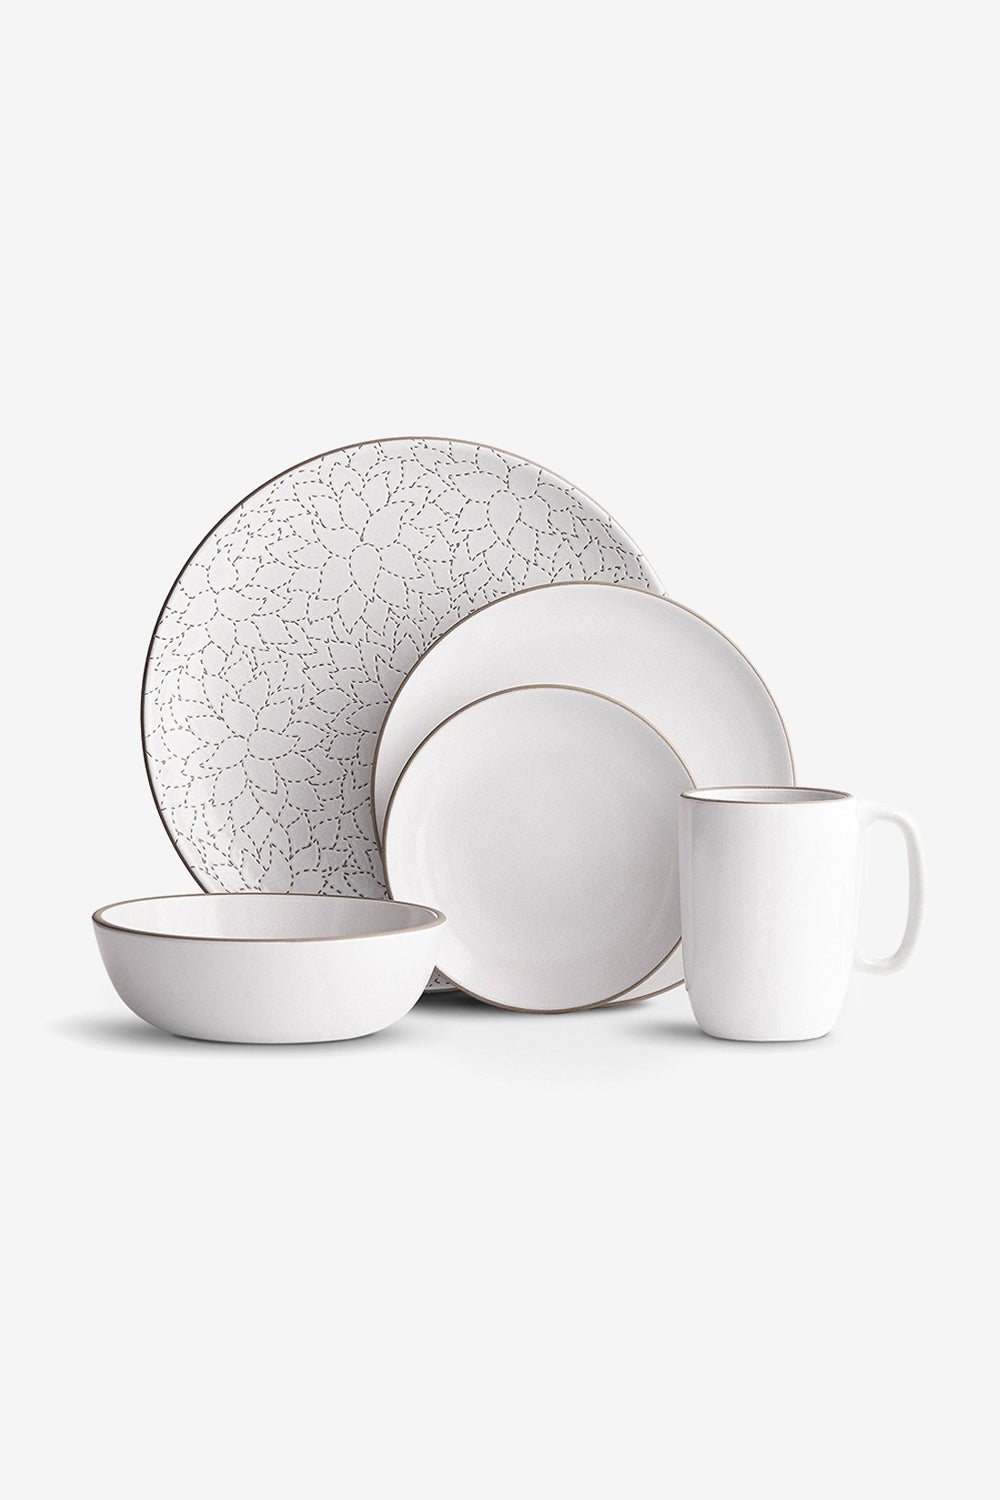 Alabama Chanin Camellia Etched Dinner Plate Hand-Etched Dinnerware Set in Opaque White and White Floral